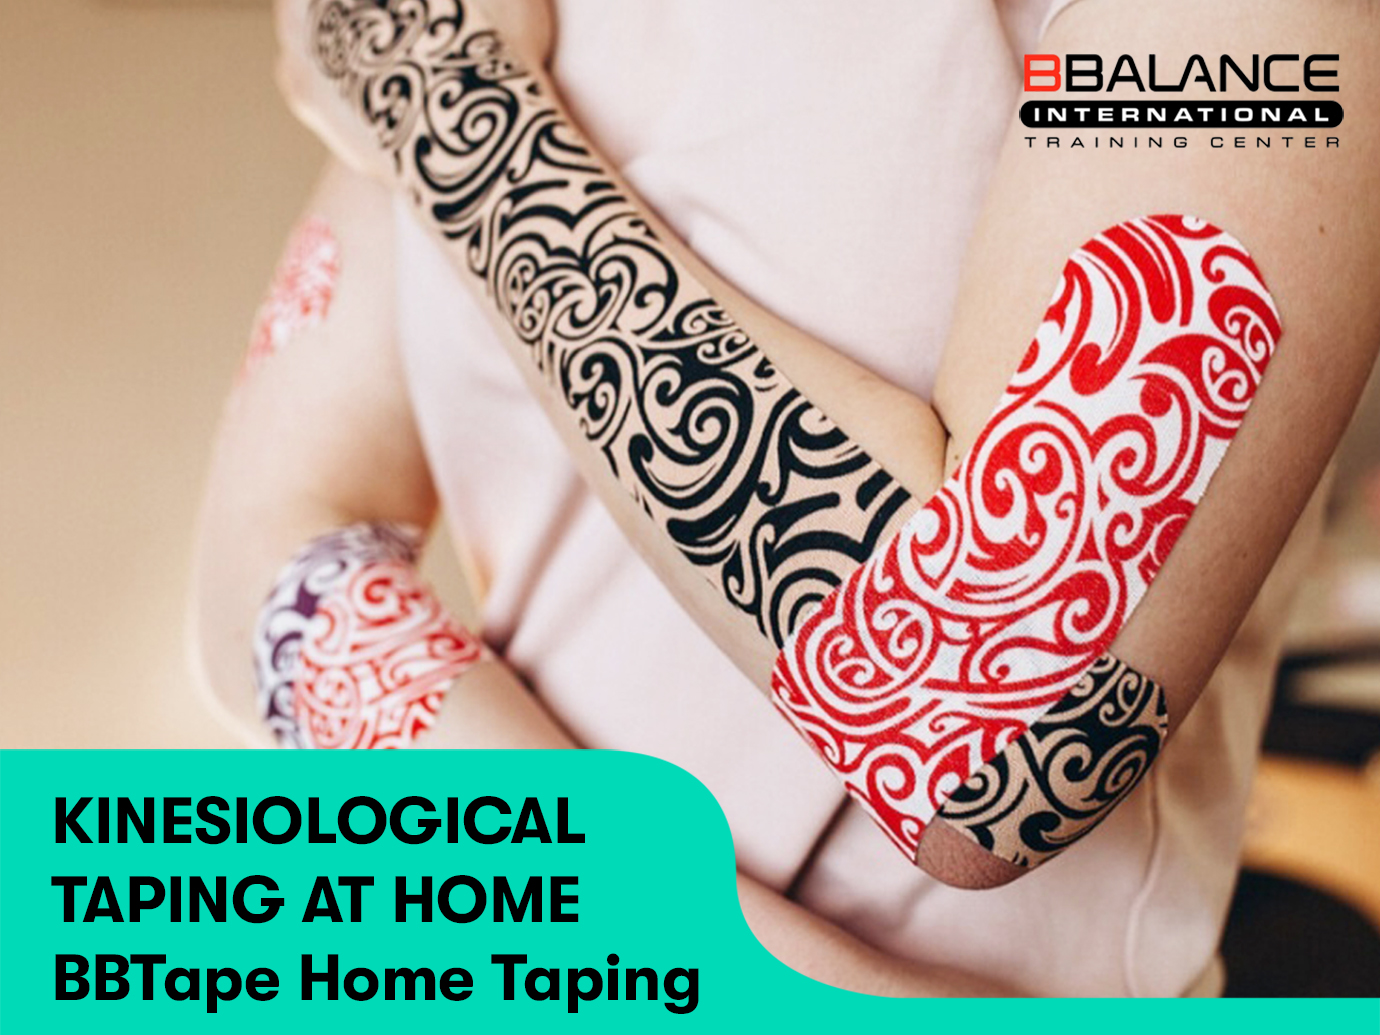 KINESIOLOGICAL TAPING AT HOME BBTape Home Taping